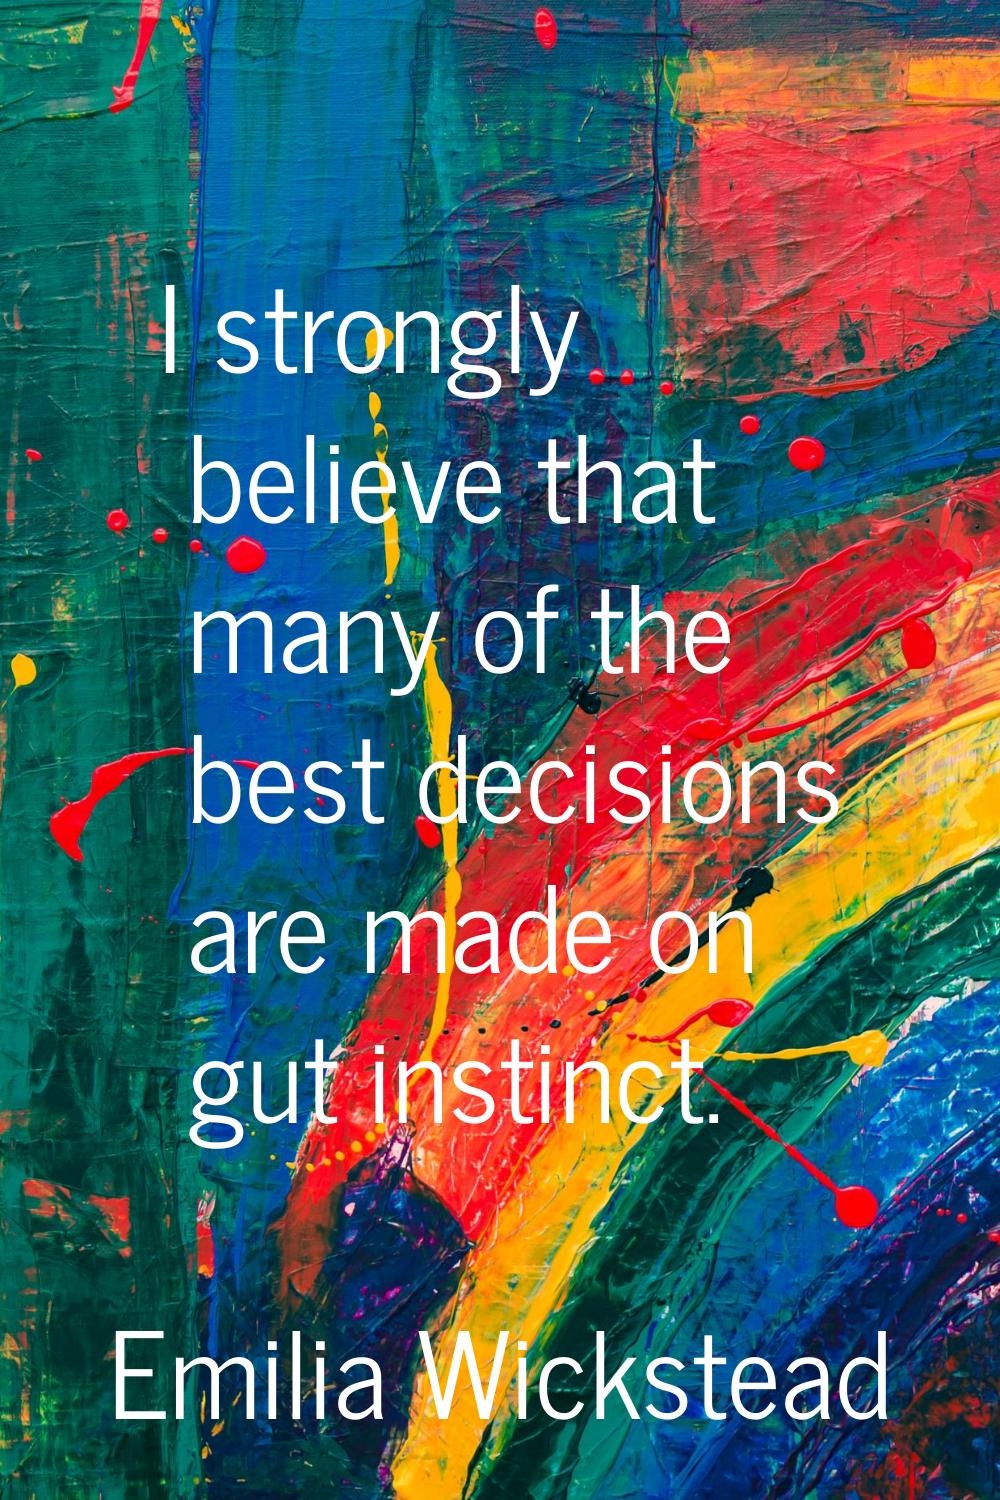 I strongly believe that many of the best decisions are made on gut instinct.